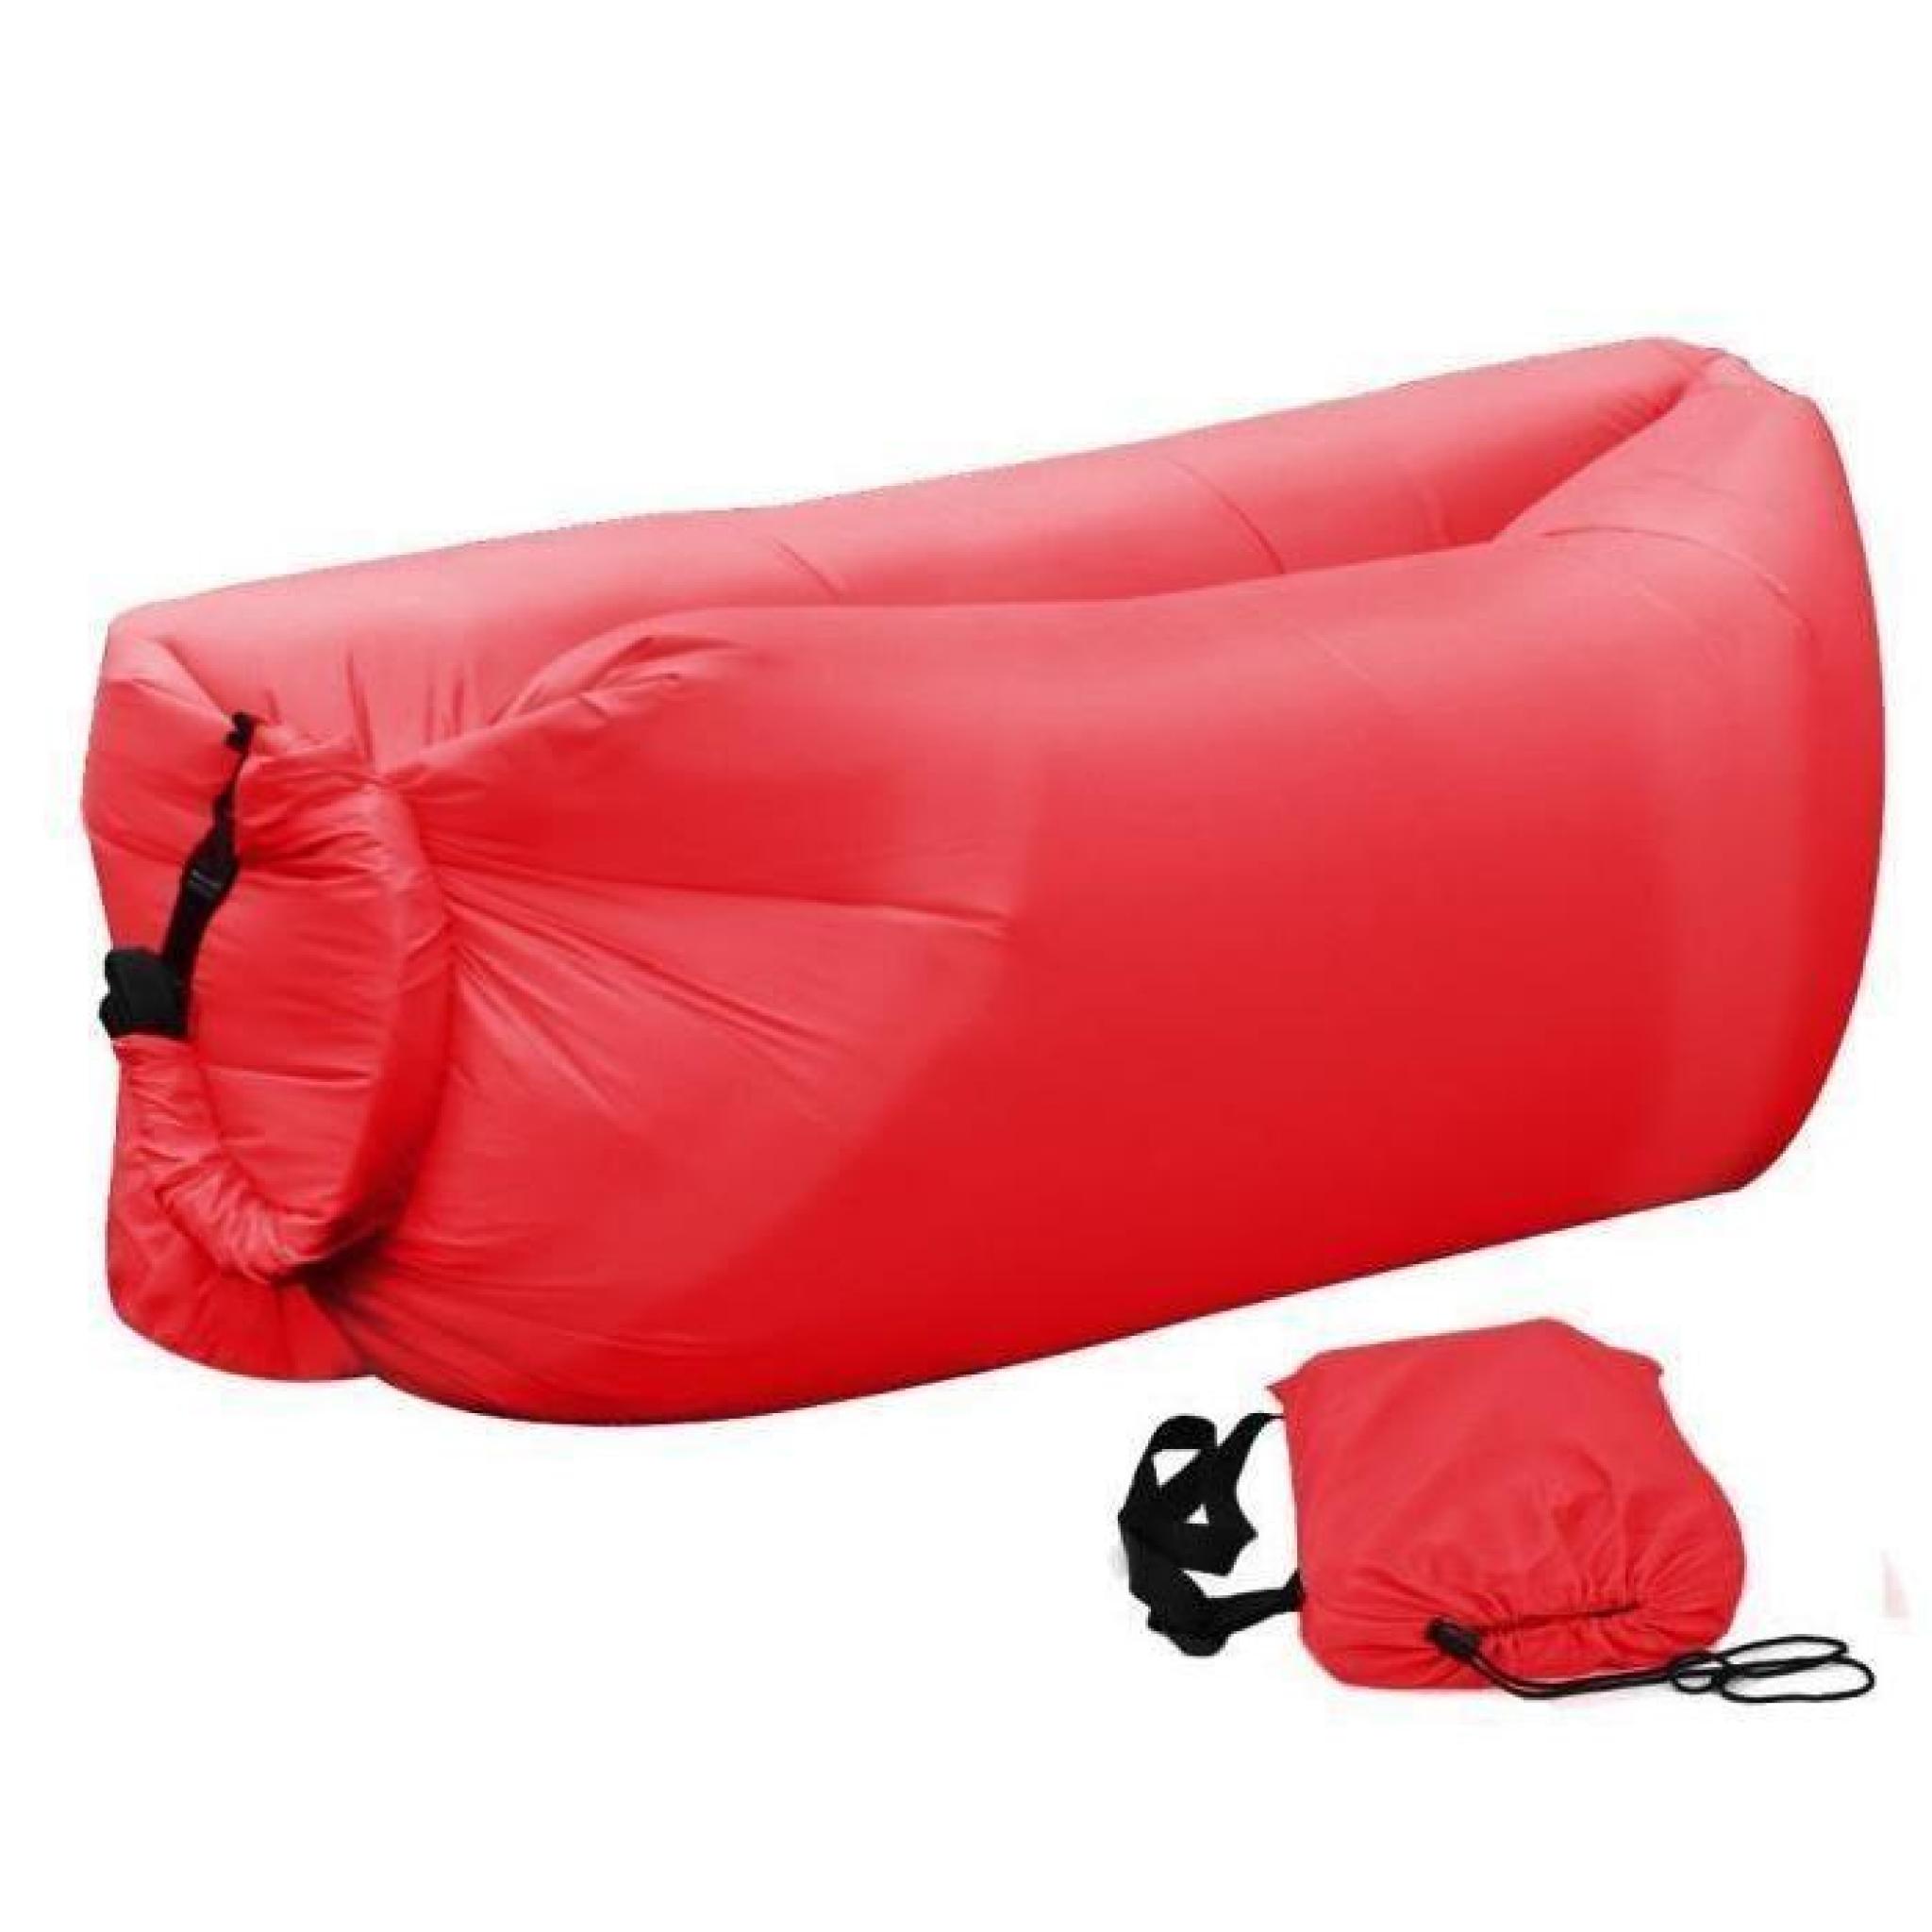 Rouge  Portable en plein air gonflable Canapé Sofa gonflable Lounger Air Sac housse pour barbecue Beach Camping